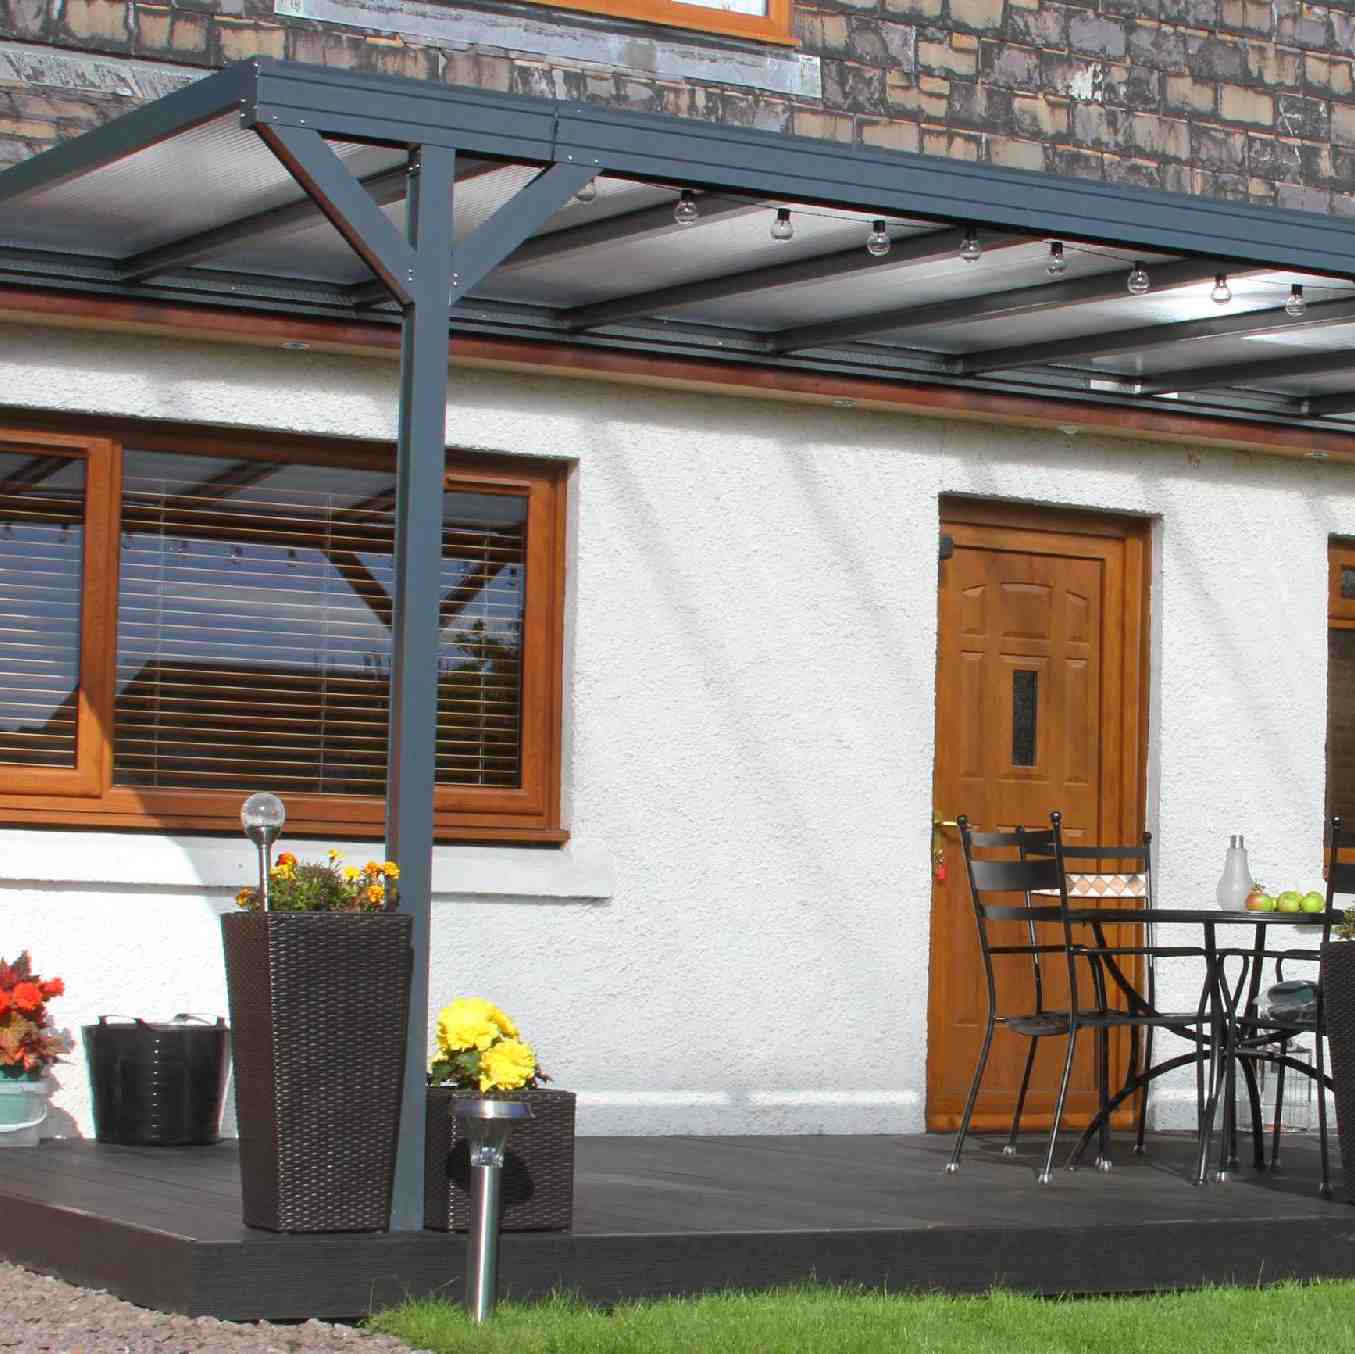 Omega Verandah, Anthracite Grey, 6mm Glass Clear Plate Polycarbonate Glazing - 7.7m (W) x 1.5m (P), (4) Supporting Posts